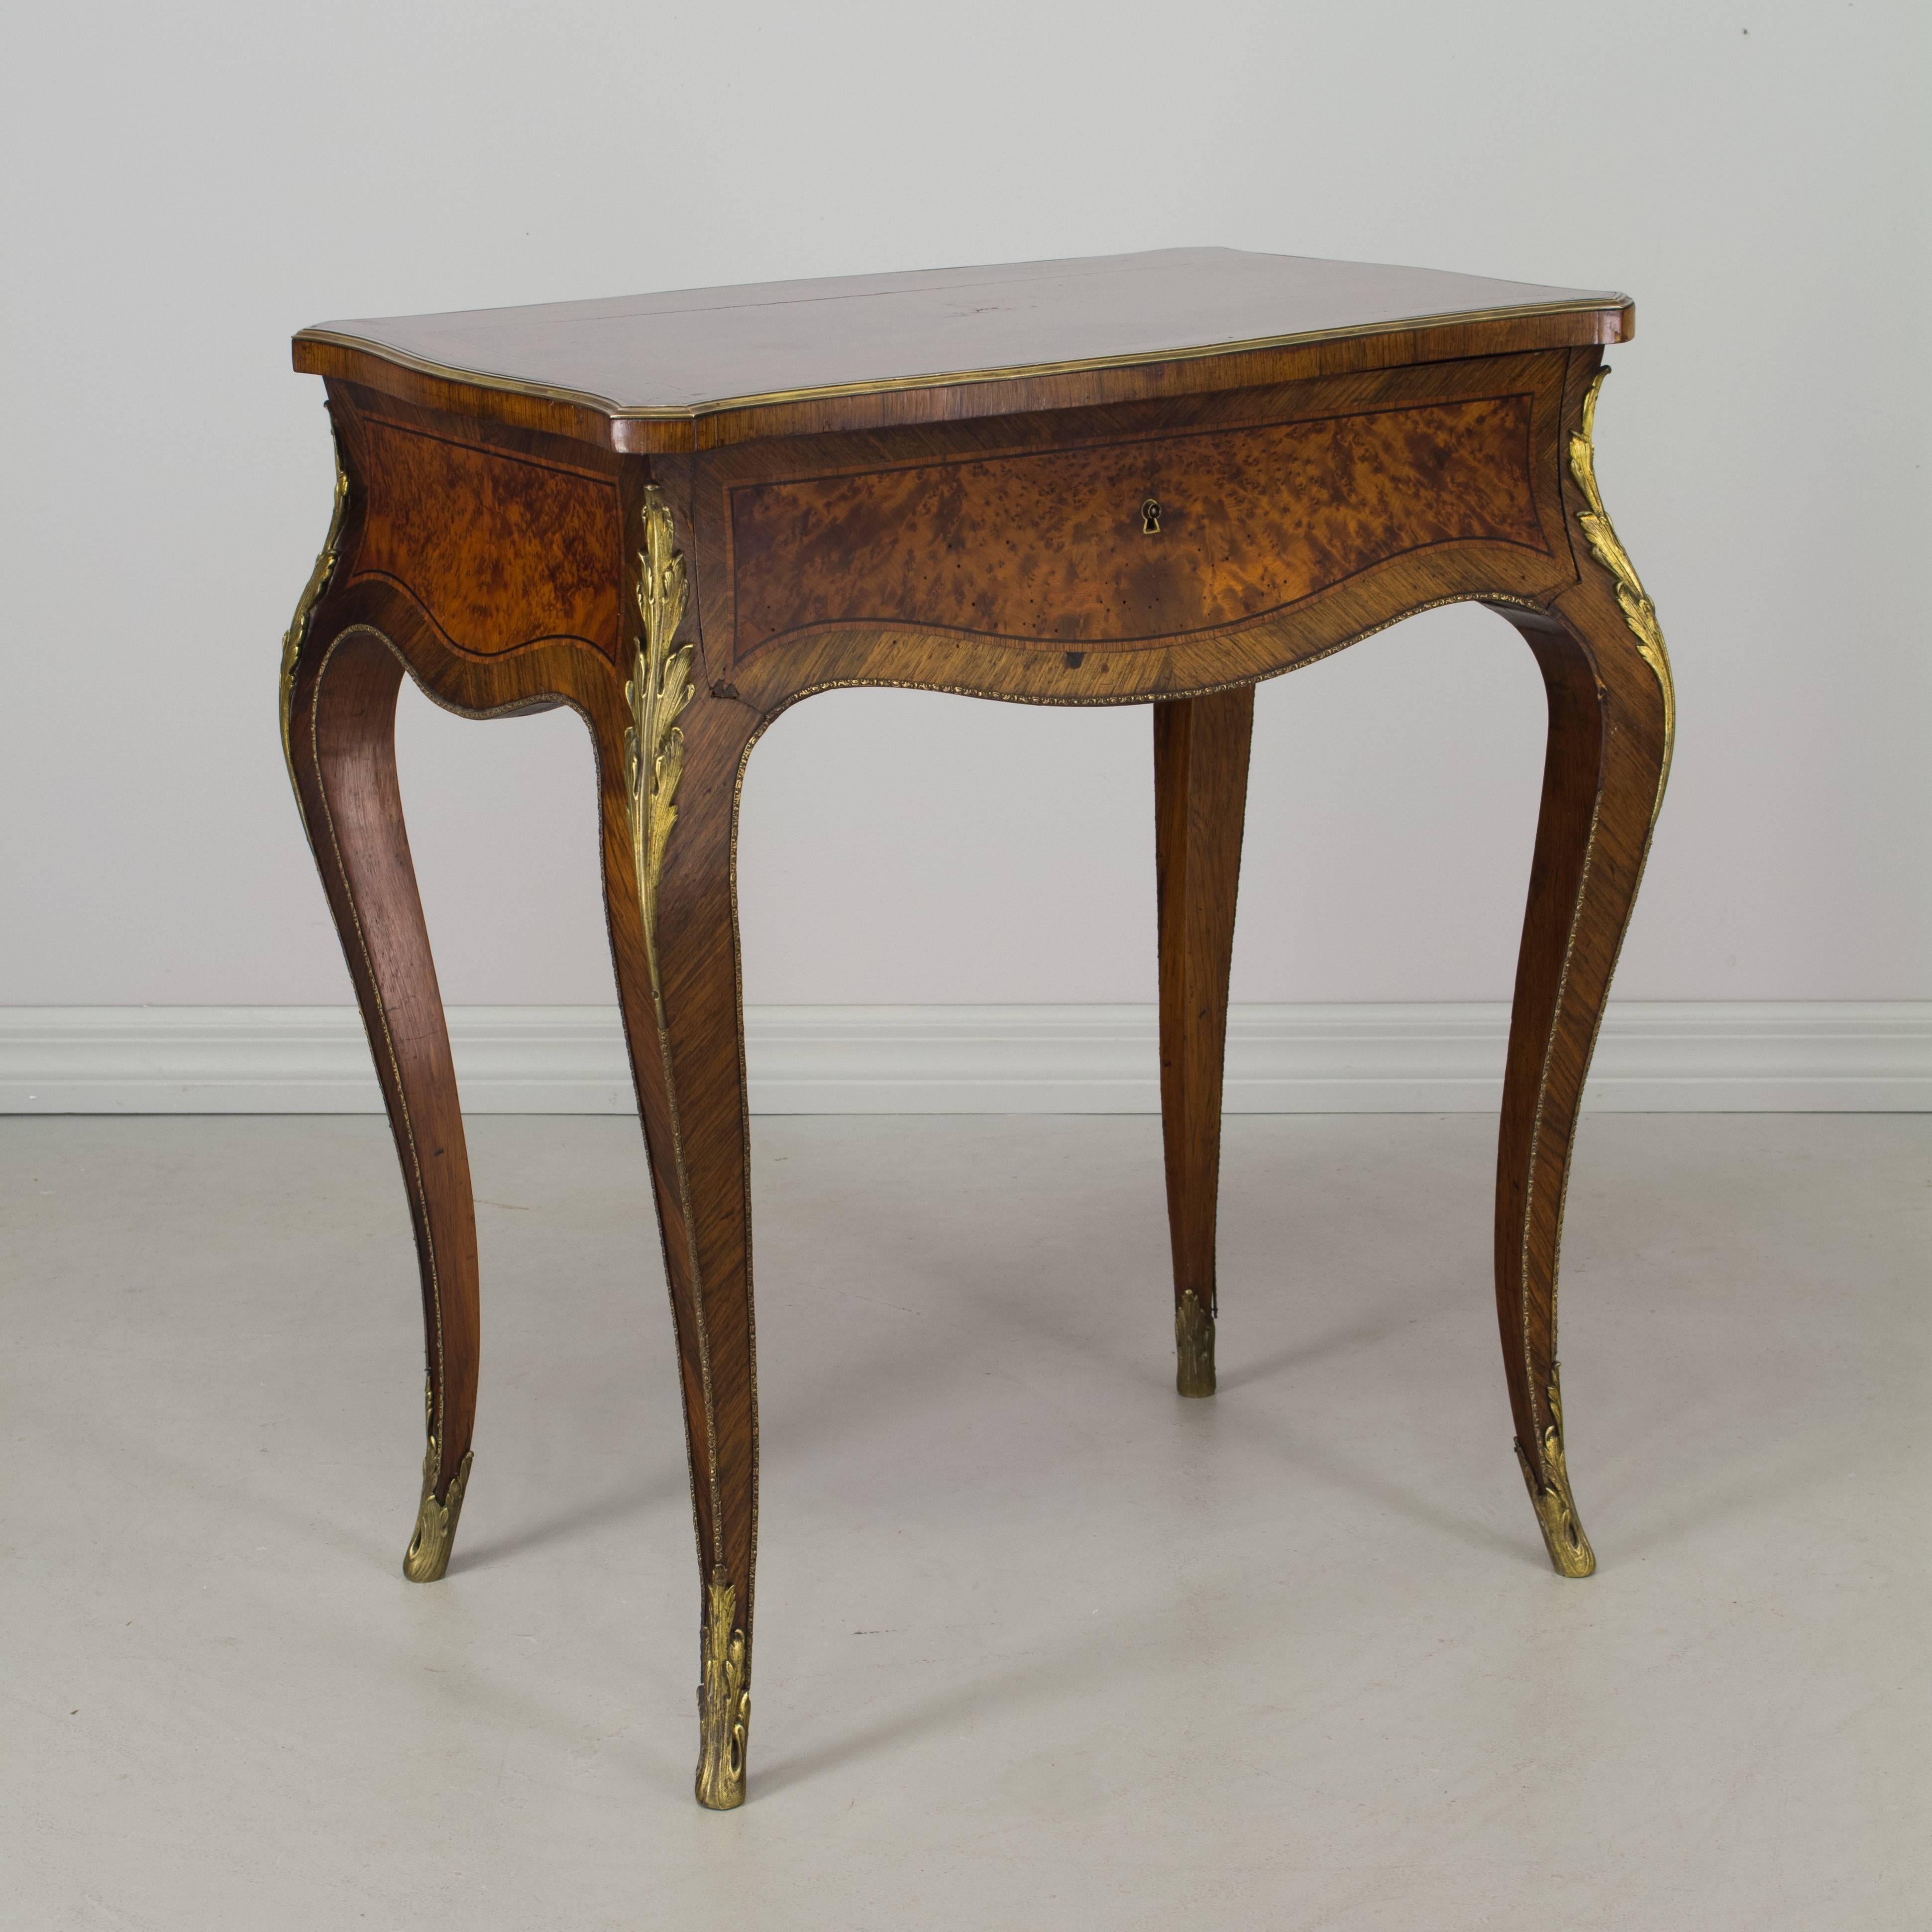 19th century Louis XV style marquetry side table with a single dovetailed drawer and hinged top with interior mirror. Made of mahogany and various wood veneers with bronze decoration. French polish finish. Exceptional craftsmanship. Etched bronze